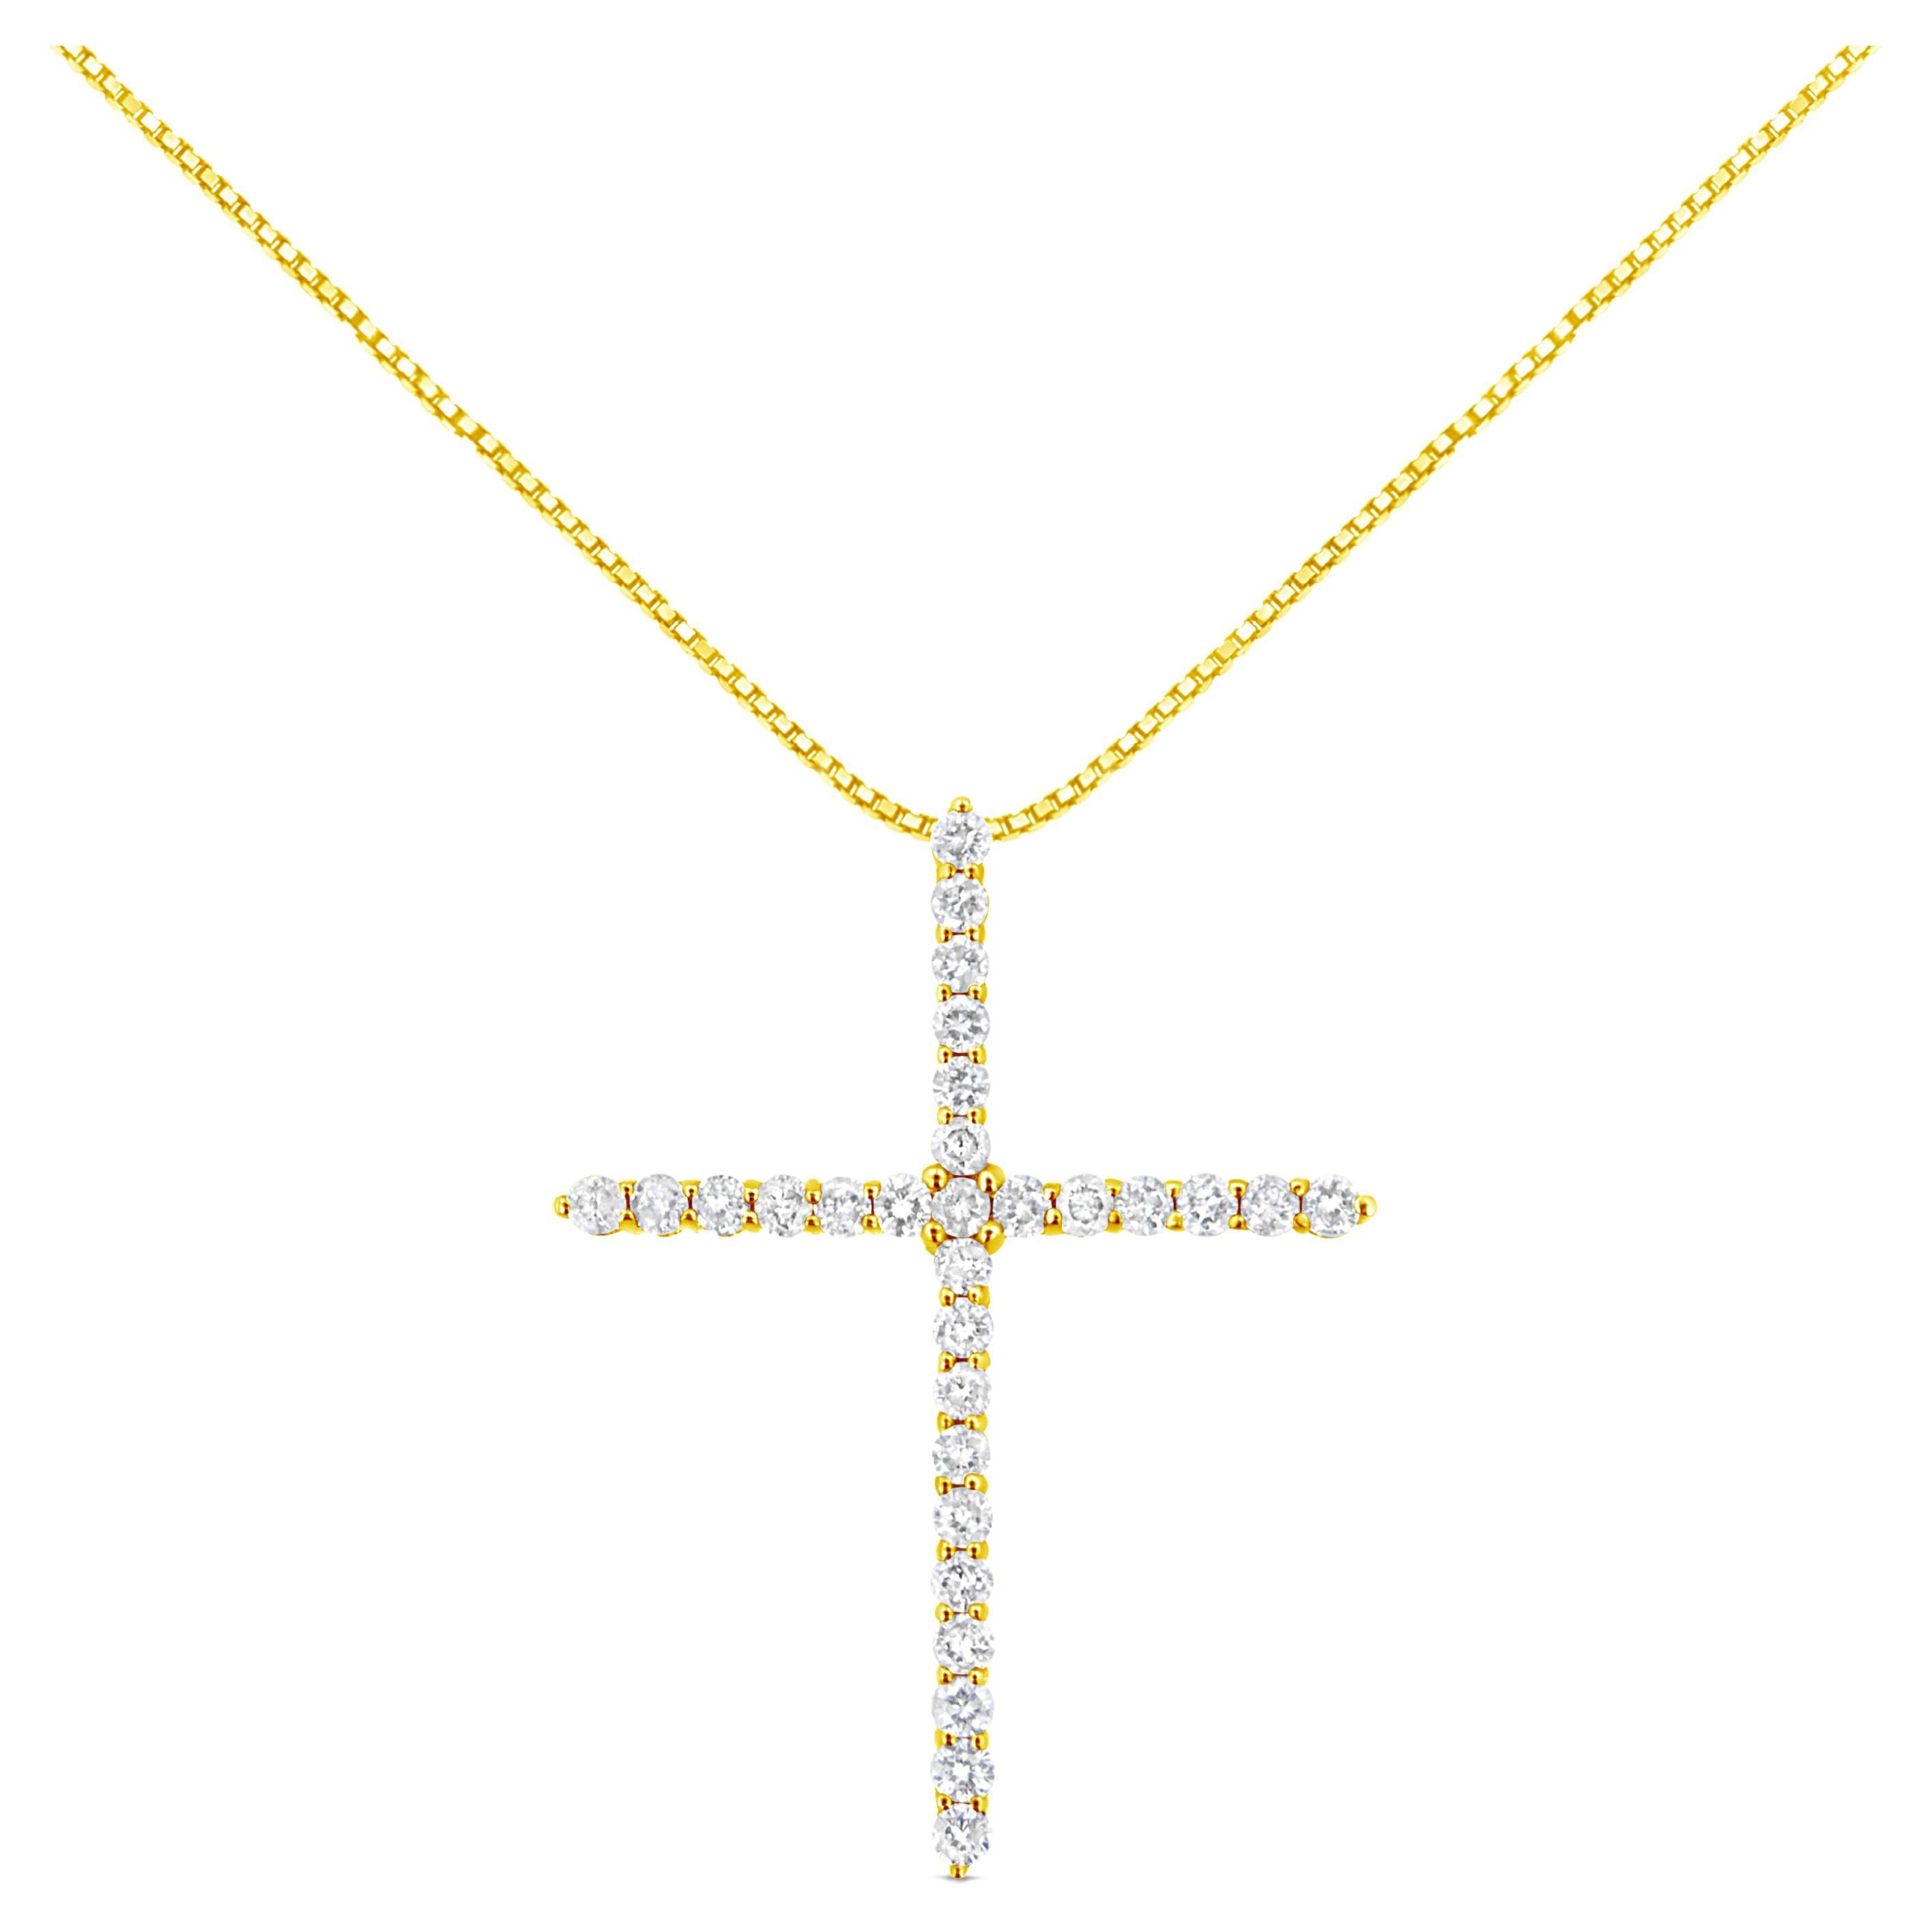 Yellow Gold Plated Sterling Silver 3.0 Carat Diamond Cross Pendant Necklace